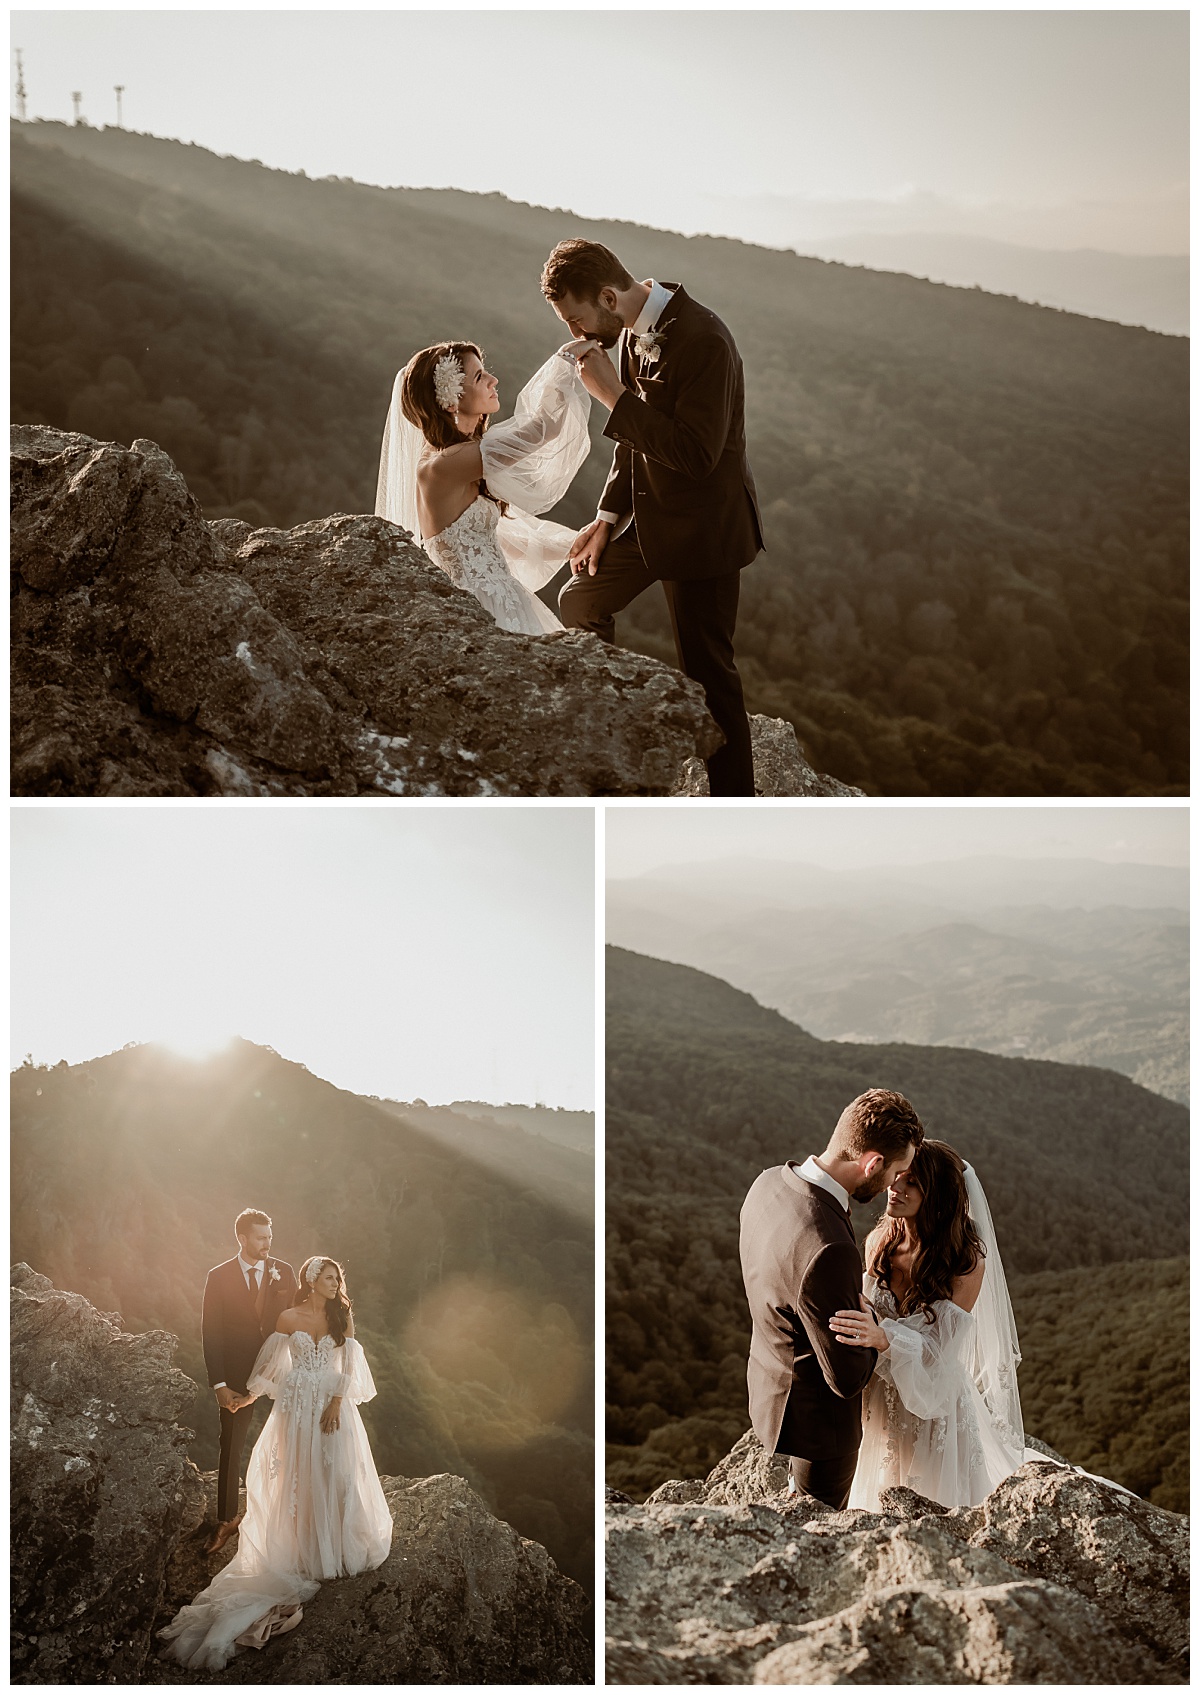 Groom kisses bride's hand on the mountains at their boho wedding at the Twickenham House in Jefferson, NC captured by Paisley Sunshine Studios. 